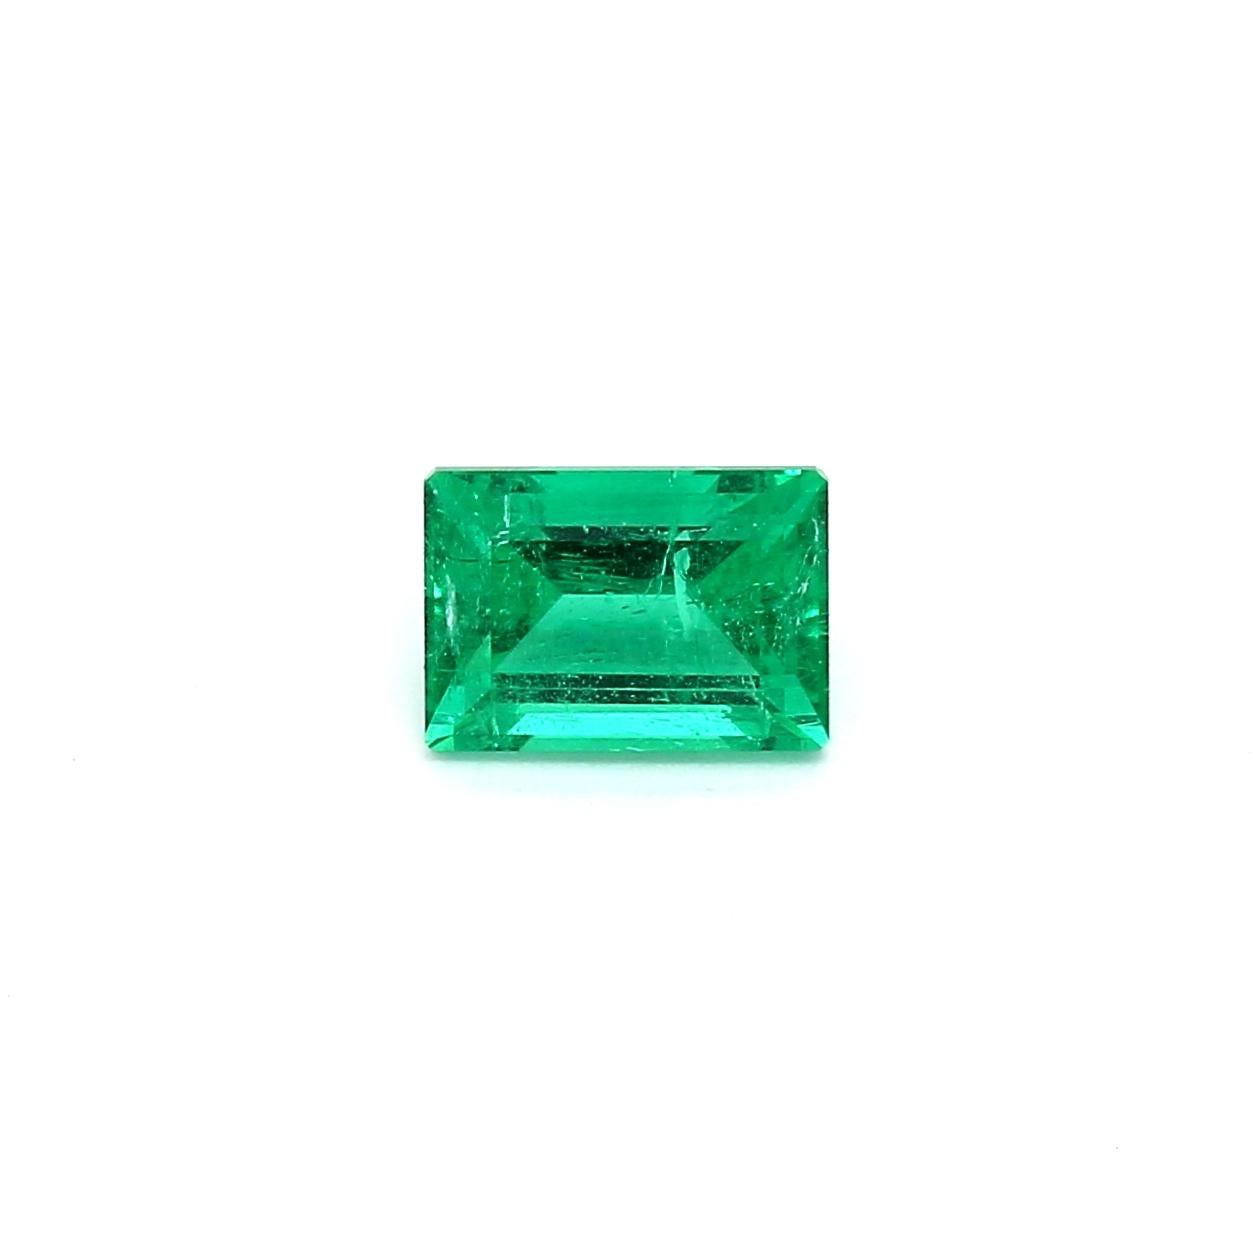 An amazing Russian Emerald which allows jewelers to create a unique piece of wearable art.
This exceptional quality gemstone would make a custom-made jewelry design. Perfect for a Ring or Pendant.

Shape - Baguette
Weight - 0.99 ct
Treatment -